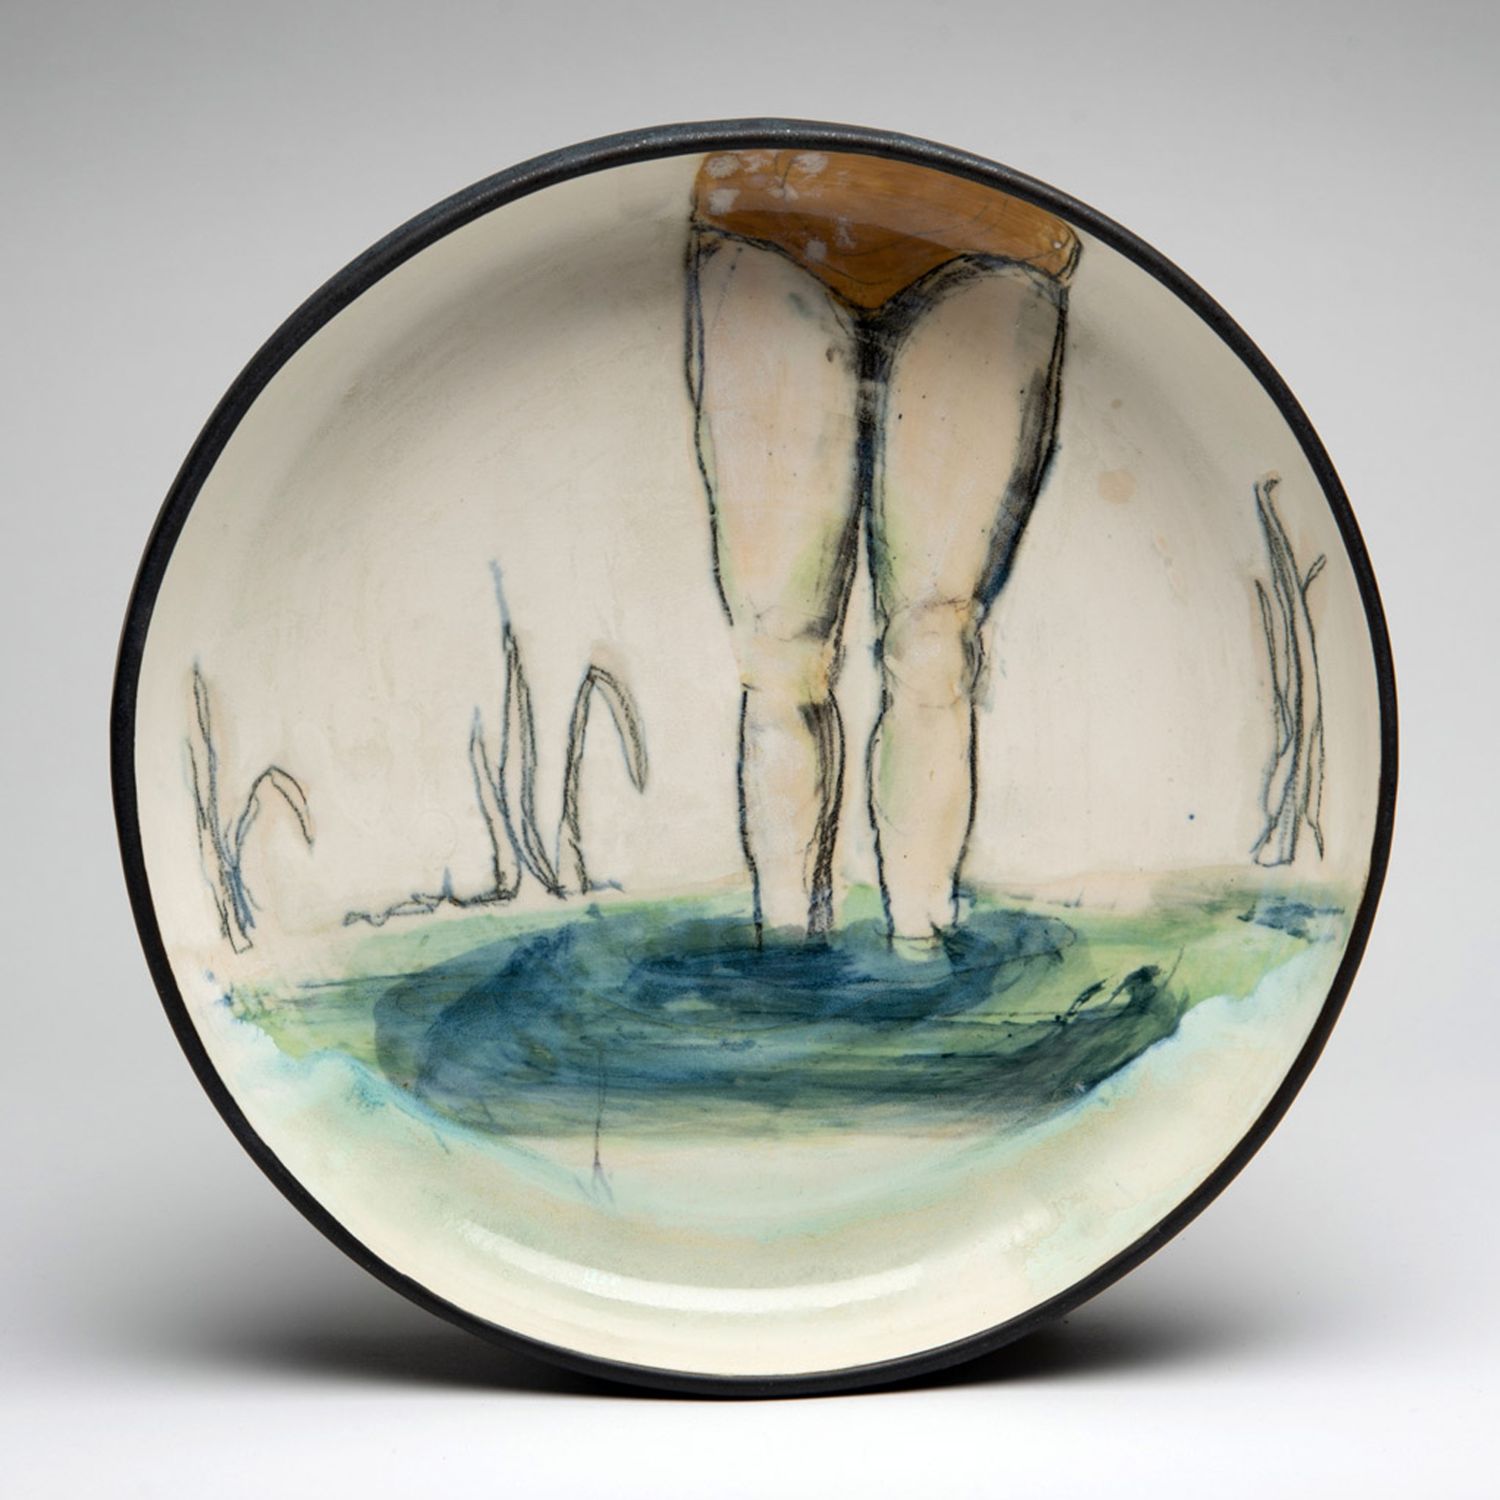 Lindsay Gravelle: Swimmer Plate Product Image 2 of 2